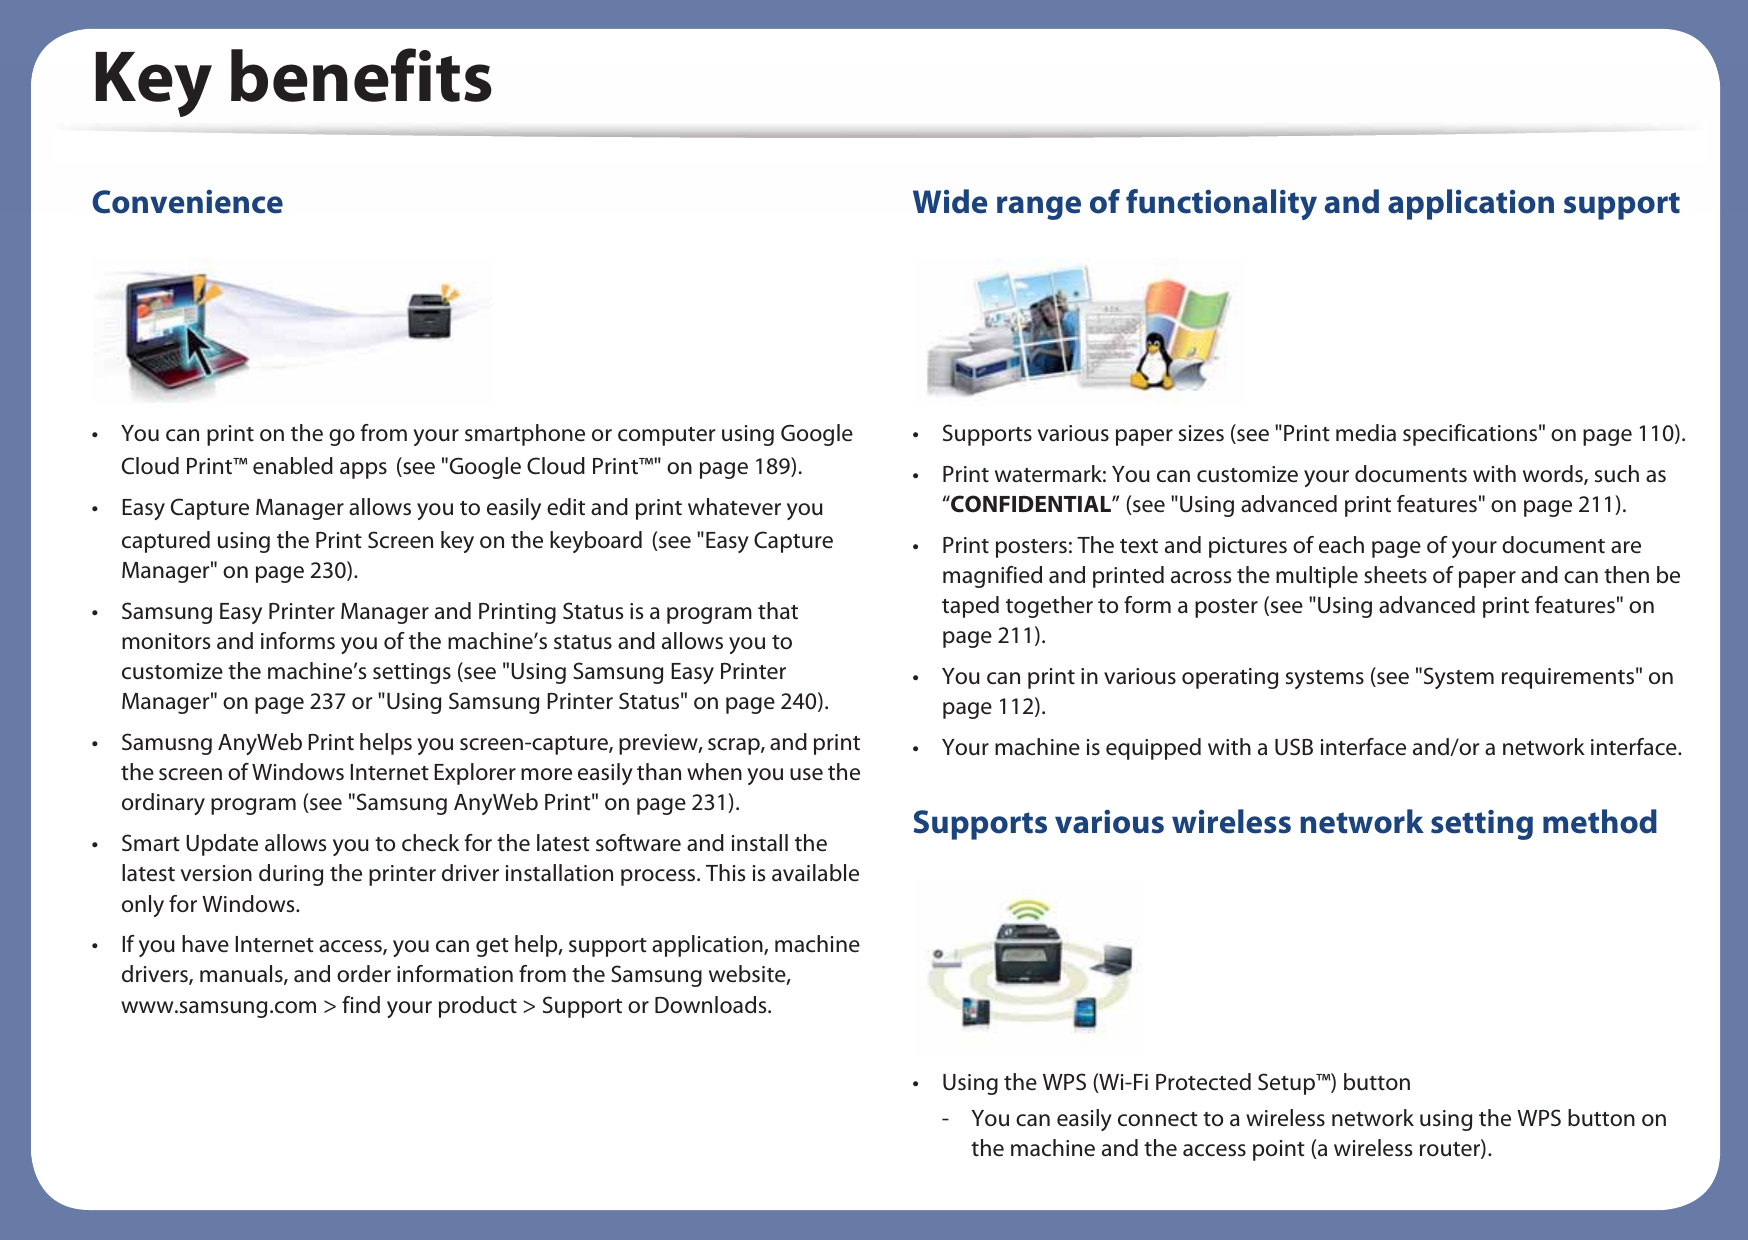 Key benefitsConvenience• You can print on the go from your smartphone or computer using Google Cloud Print™ enabled appsG(see &quot;Google Cloud Print™&quot; on page 189).• Easy Capture Manager allows you to easily edit and print whatever you captured using the Print Screen key on the keyboardG(see &quot;Easy Capture Manager&quot; on page 230).• Samsung Easy Printer Manager and Printing Status is a program that monitors and informs you of the machine’s status and allows you to customize the machine’s settings (see &quot;Using Samsung Easy Printer Manager&quot; on page 237 or &quot;Using Samsung Printer Status&quot; on page 240).• Samusng AnyWeb Print helps you screen-capture, preview, scrap, and print the screen of Windows Internet Explorer more easily than when you use the ordinary program (see &quot;Samsung AnyWeb Print&quot; on page 231).• Smart Update allows you to check for the latest software and install the latest version during the printer driver installation process. This is available only for Windows.• If you have Internet access, you can get help, support application, machine drivers, manuals, and order information from the Samsung website, www.samsung.com &gt; find your product &gt; Support or Downloads.Wide range of functionality and application support• Supports various paper sizes (see &quot;Print media specifications&quot; on page 110).• Print watermark: You can customize your documents with words, such as “CONFIDENTIAL” (see &quot;Using advanced print features&quot; on page 211).• Print posters: The text and pictures of each page of your document are magnified and printed across the multiple sheets of paper and can then be taped together to form a poster (see &quot;Using advanced print features&quot; on page 211).• You can print in various operating systems (see &quot;System requirements&quot; on page 112).• Your machine is equipped with a USB interface and/or a network interface.Supports various wireless network setting method • Using the WPS (Wi-Fi Protected Setup™) button- You can easily connect to a wireless network using the WPS button on the machine and the access point (a wireless router).